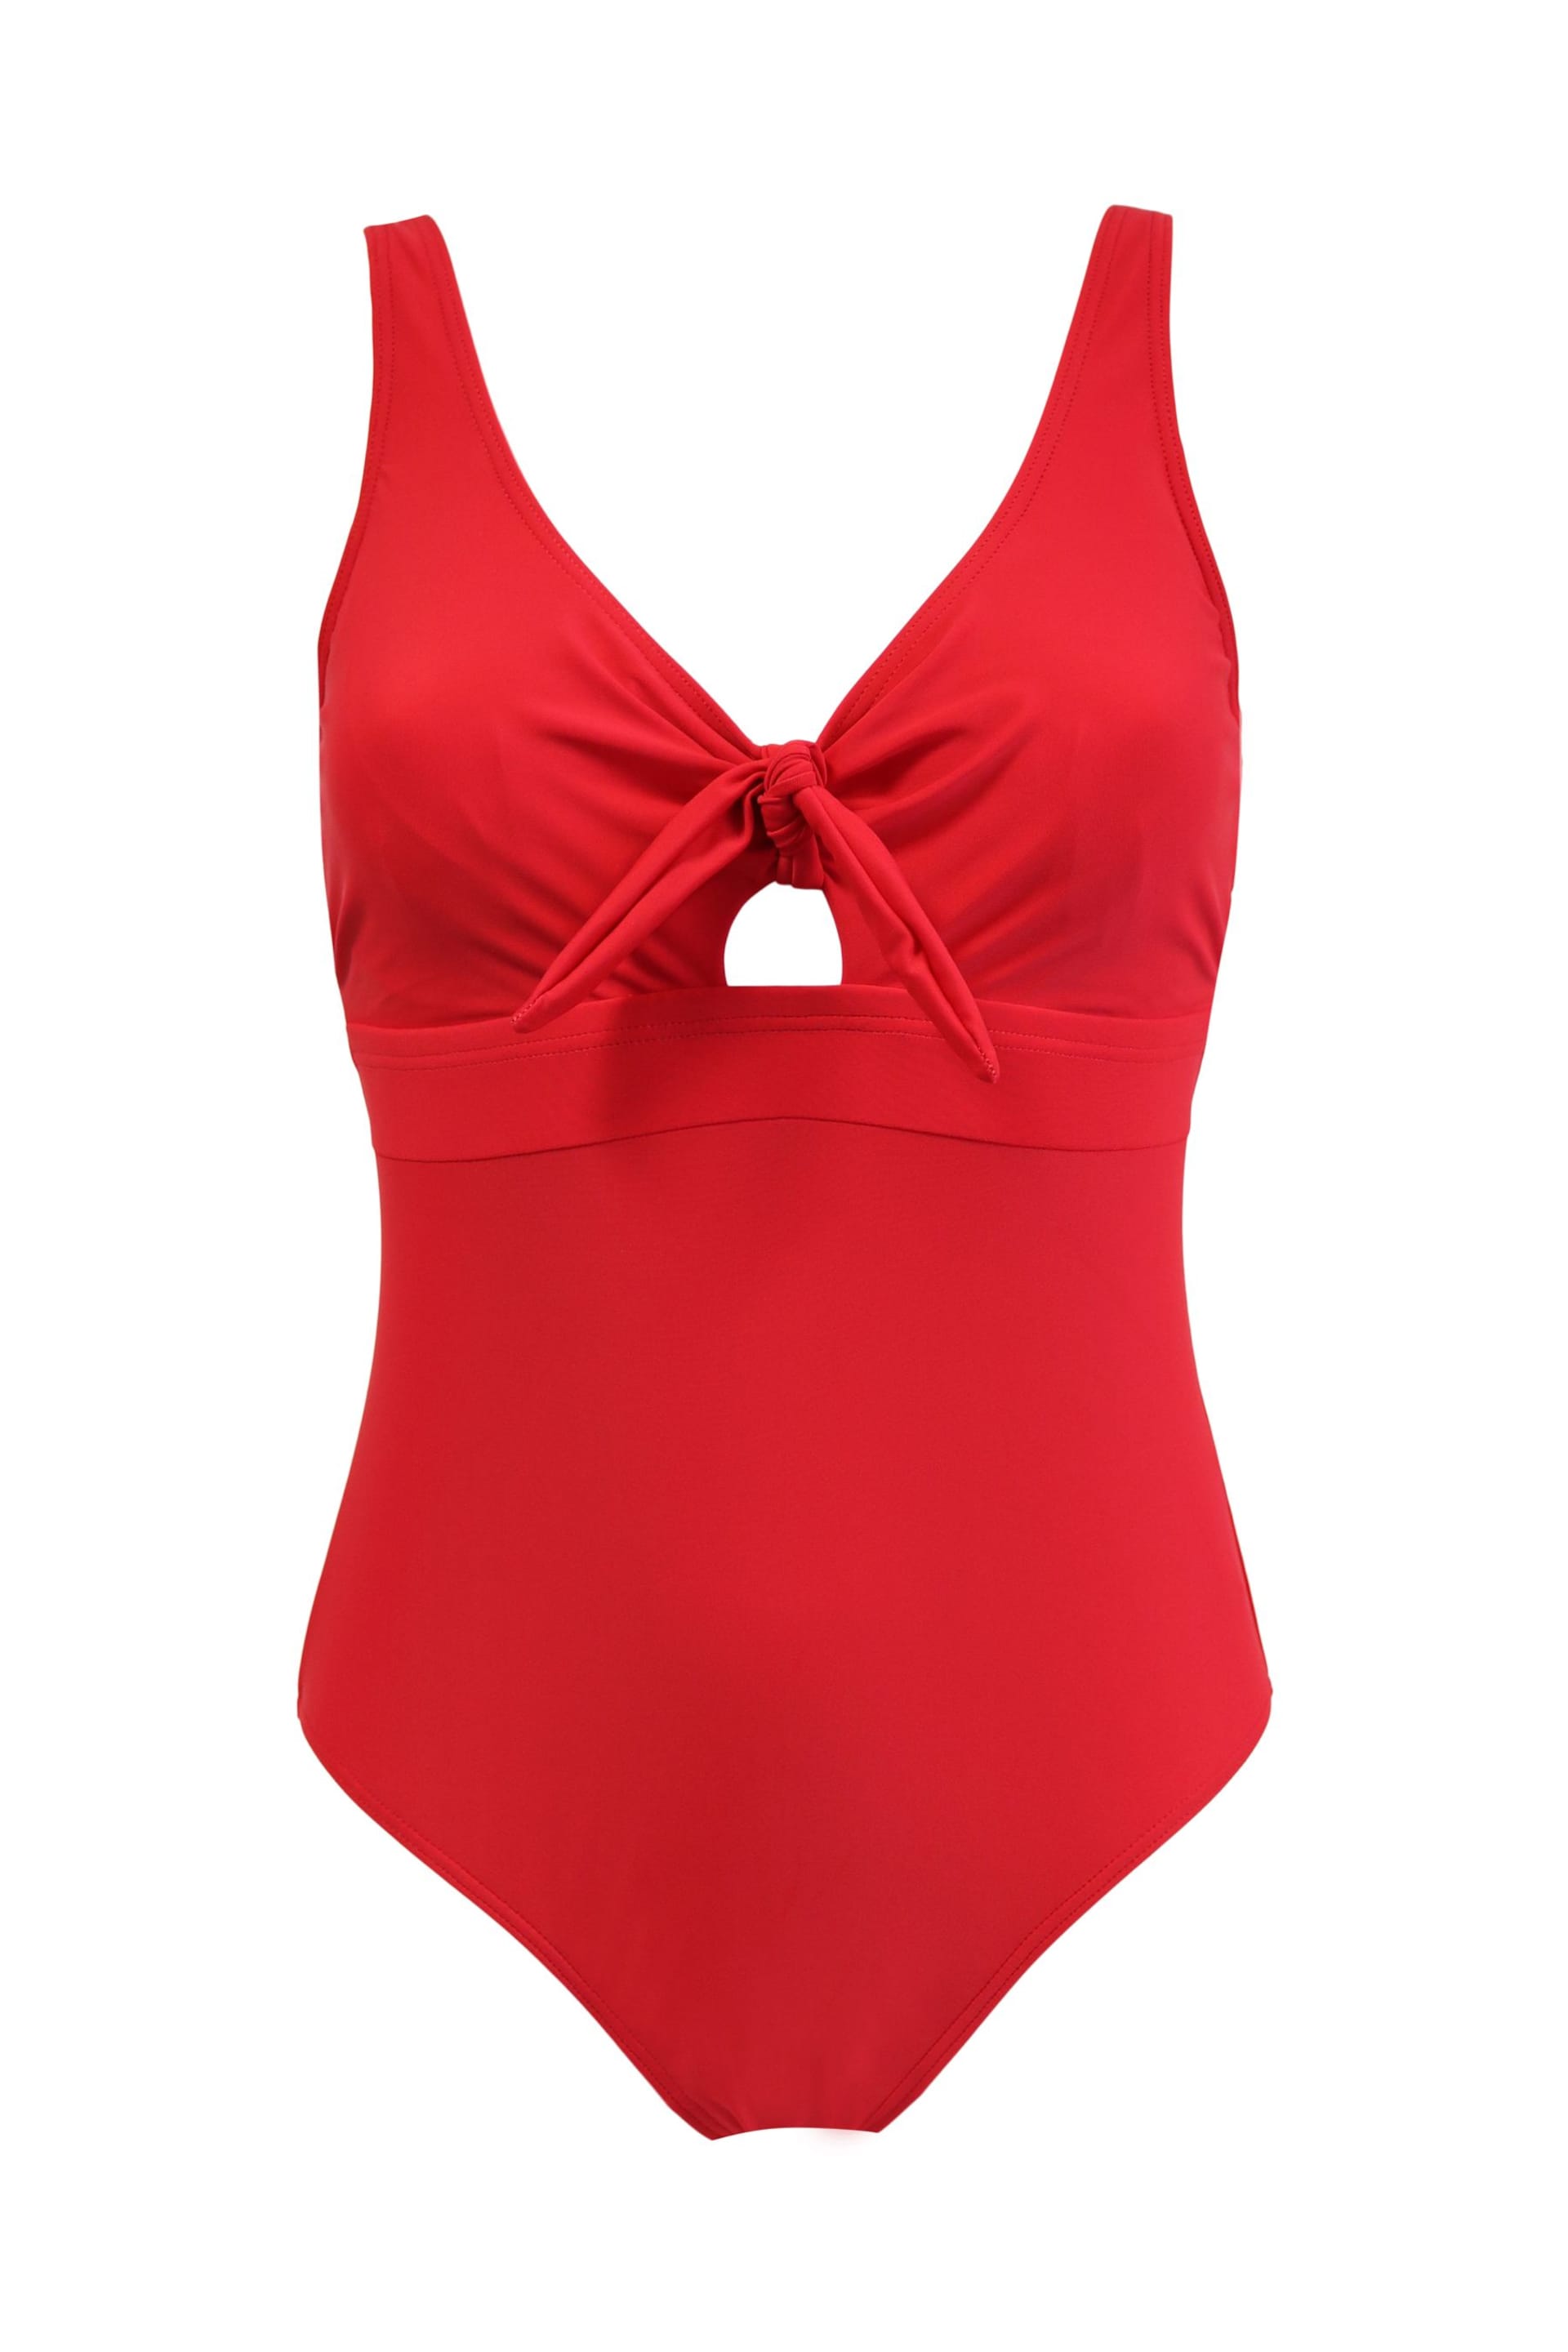 Pour Moi Red Underwired Bow Front Control Swimsuit - Image 4 of 5